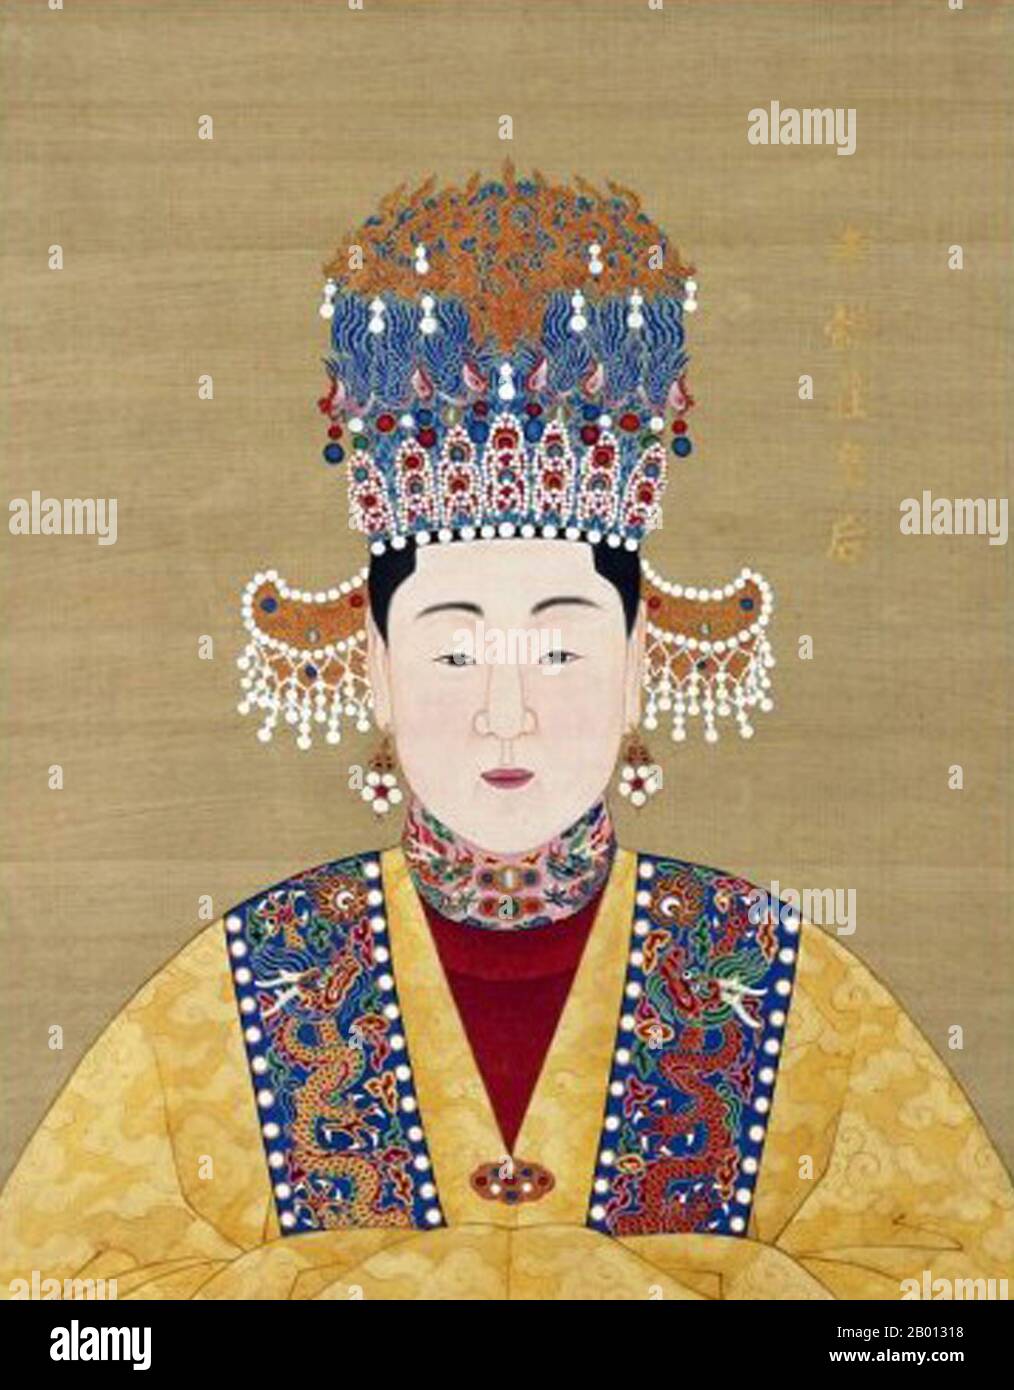 China: Empress Xiao Yi Zhuang (-1558), consort of the 13th Ming Emperor Longqing (r. 1567-1572). Hanging scroll painting, 16th-17th century.  Empress Xiaoyizhuang was the first consort of the Longqing Emperor of the Ming Dynasty. She married the emperor in 1553 and bore him three children but died in 1558. Stock Photo